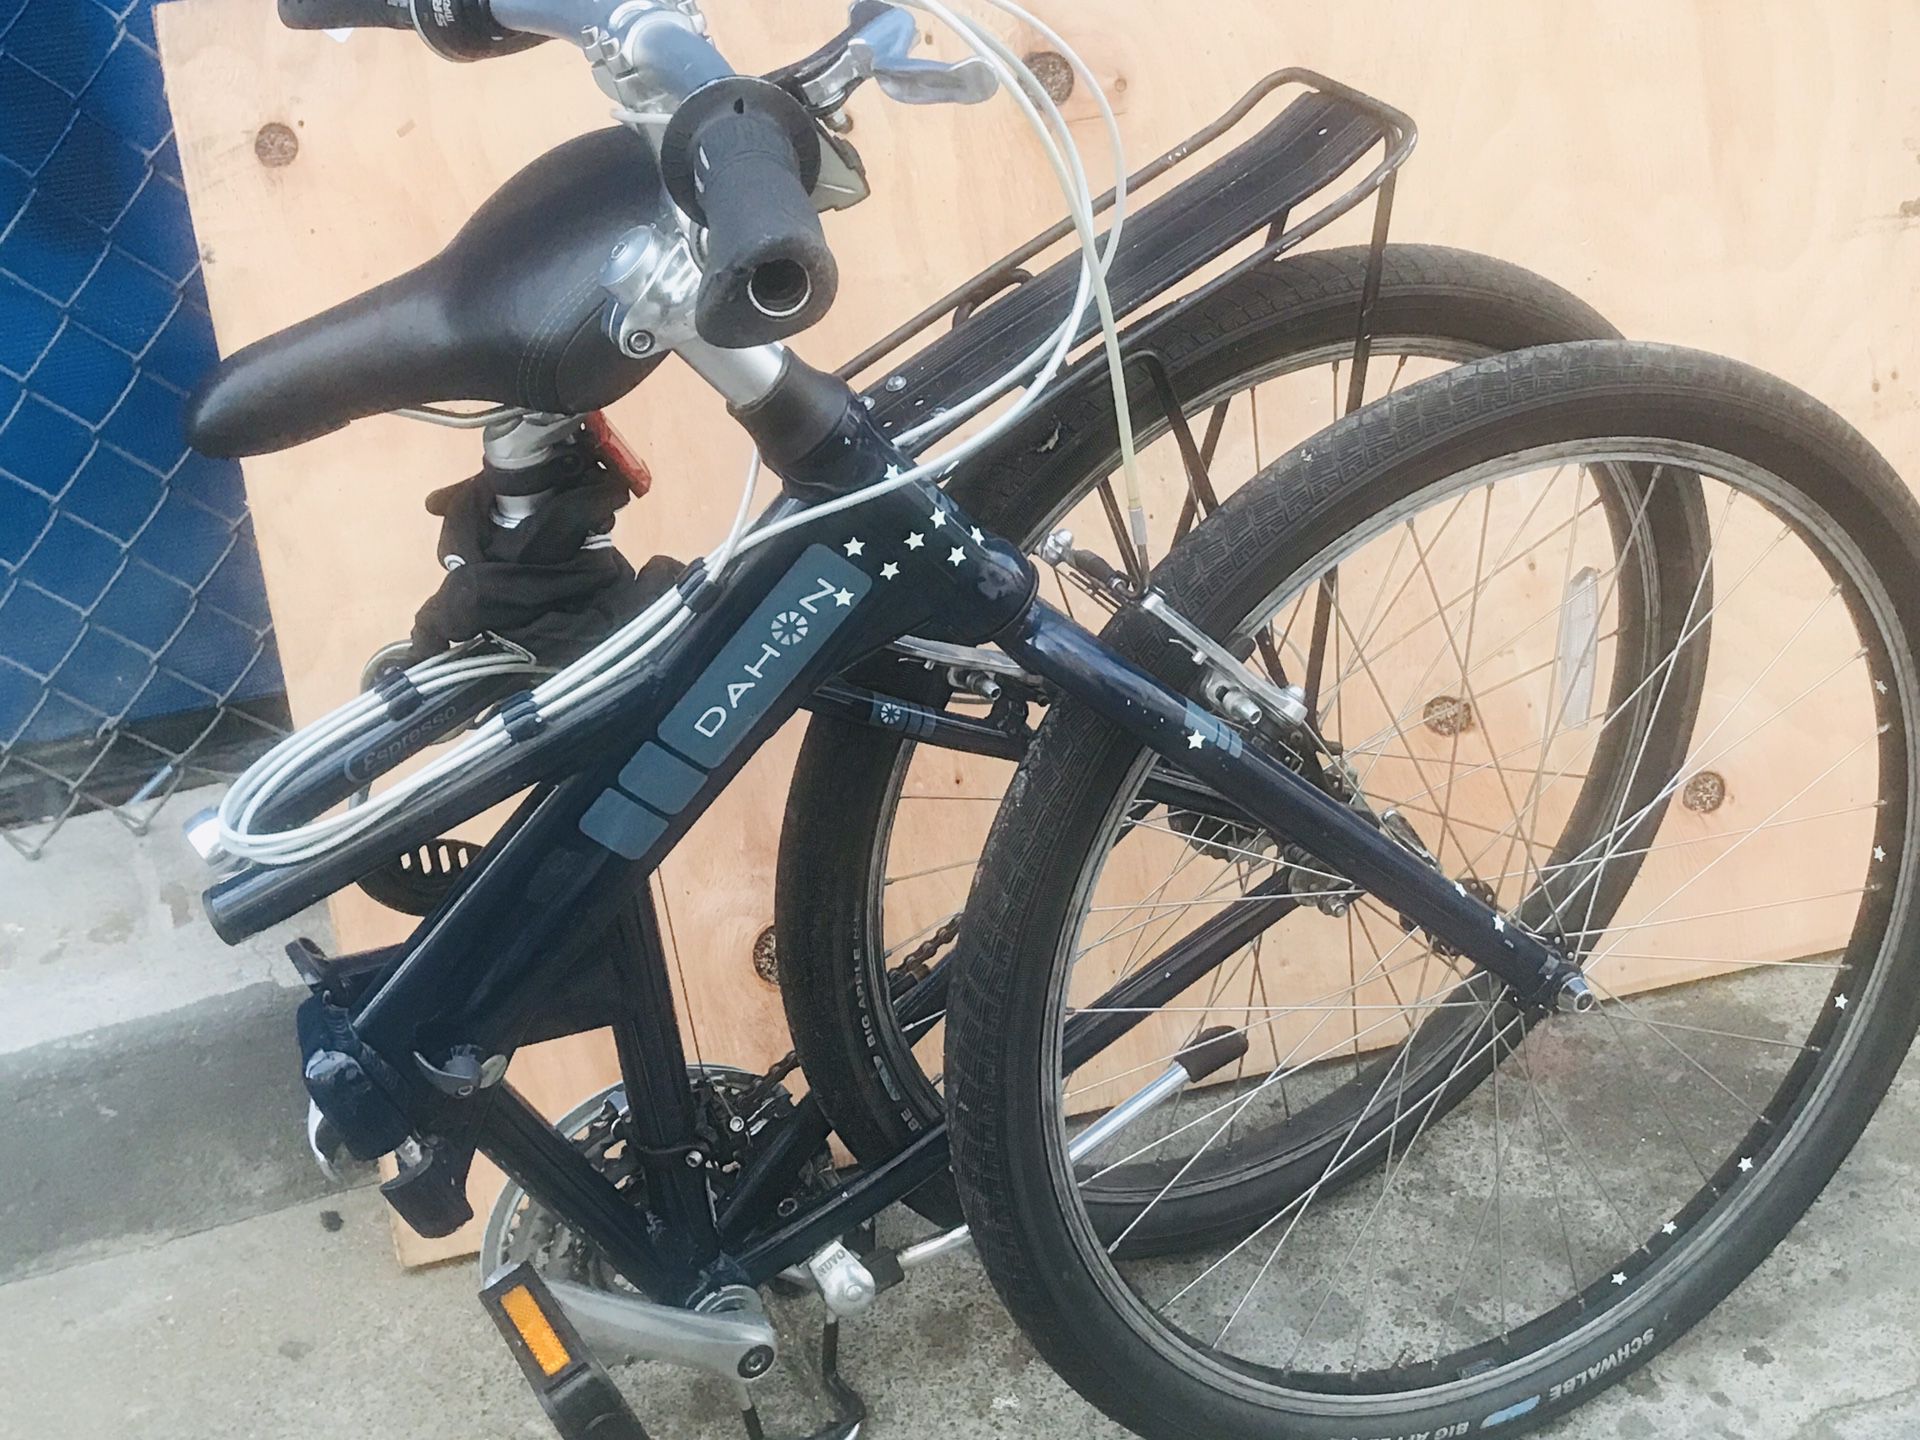 26 “ Dahon fold up bike. Only interested in serious buyers. Going back to the east coast for school.Great commuter bike. 500 obo